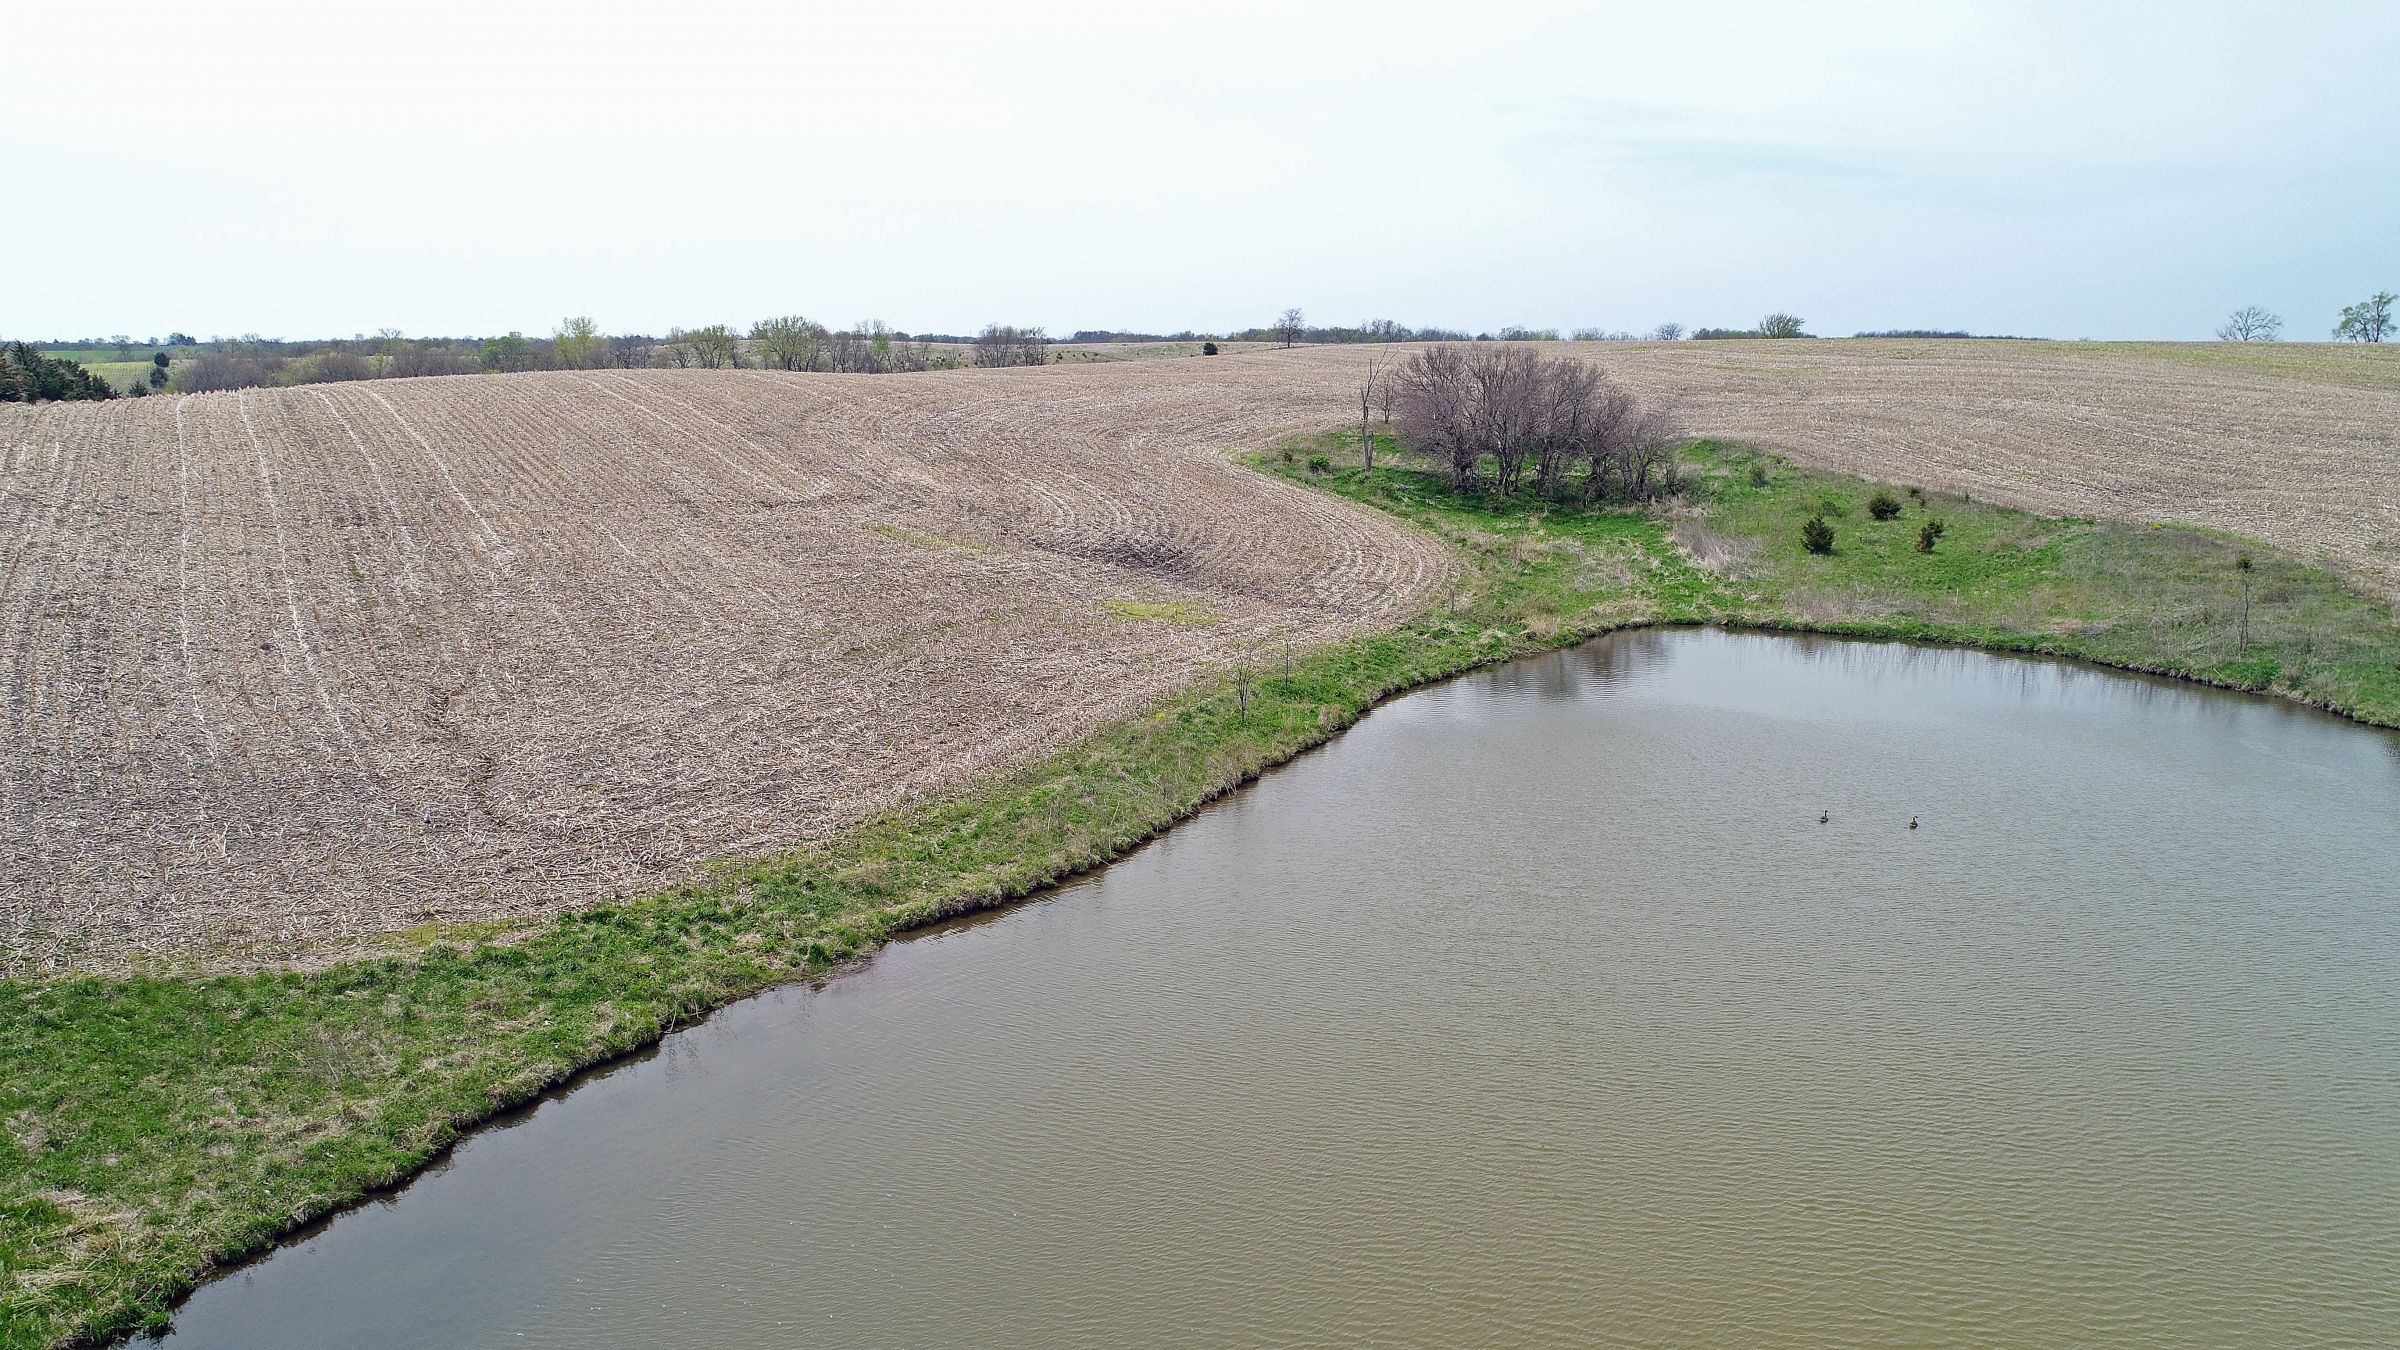 land-decatur-county-iowa-39-acres-listing-number-15495-1-2021-04-27-215249.JPG